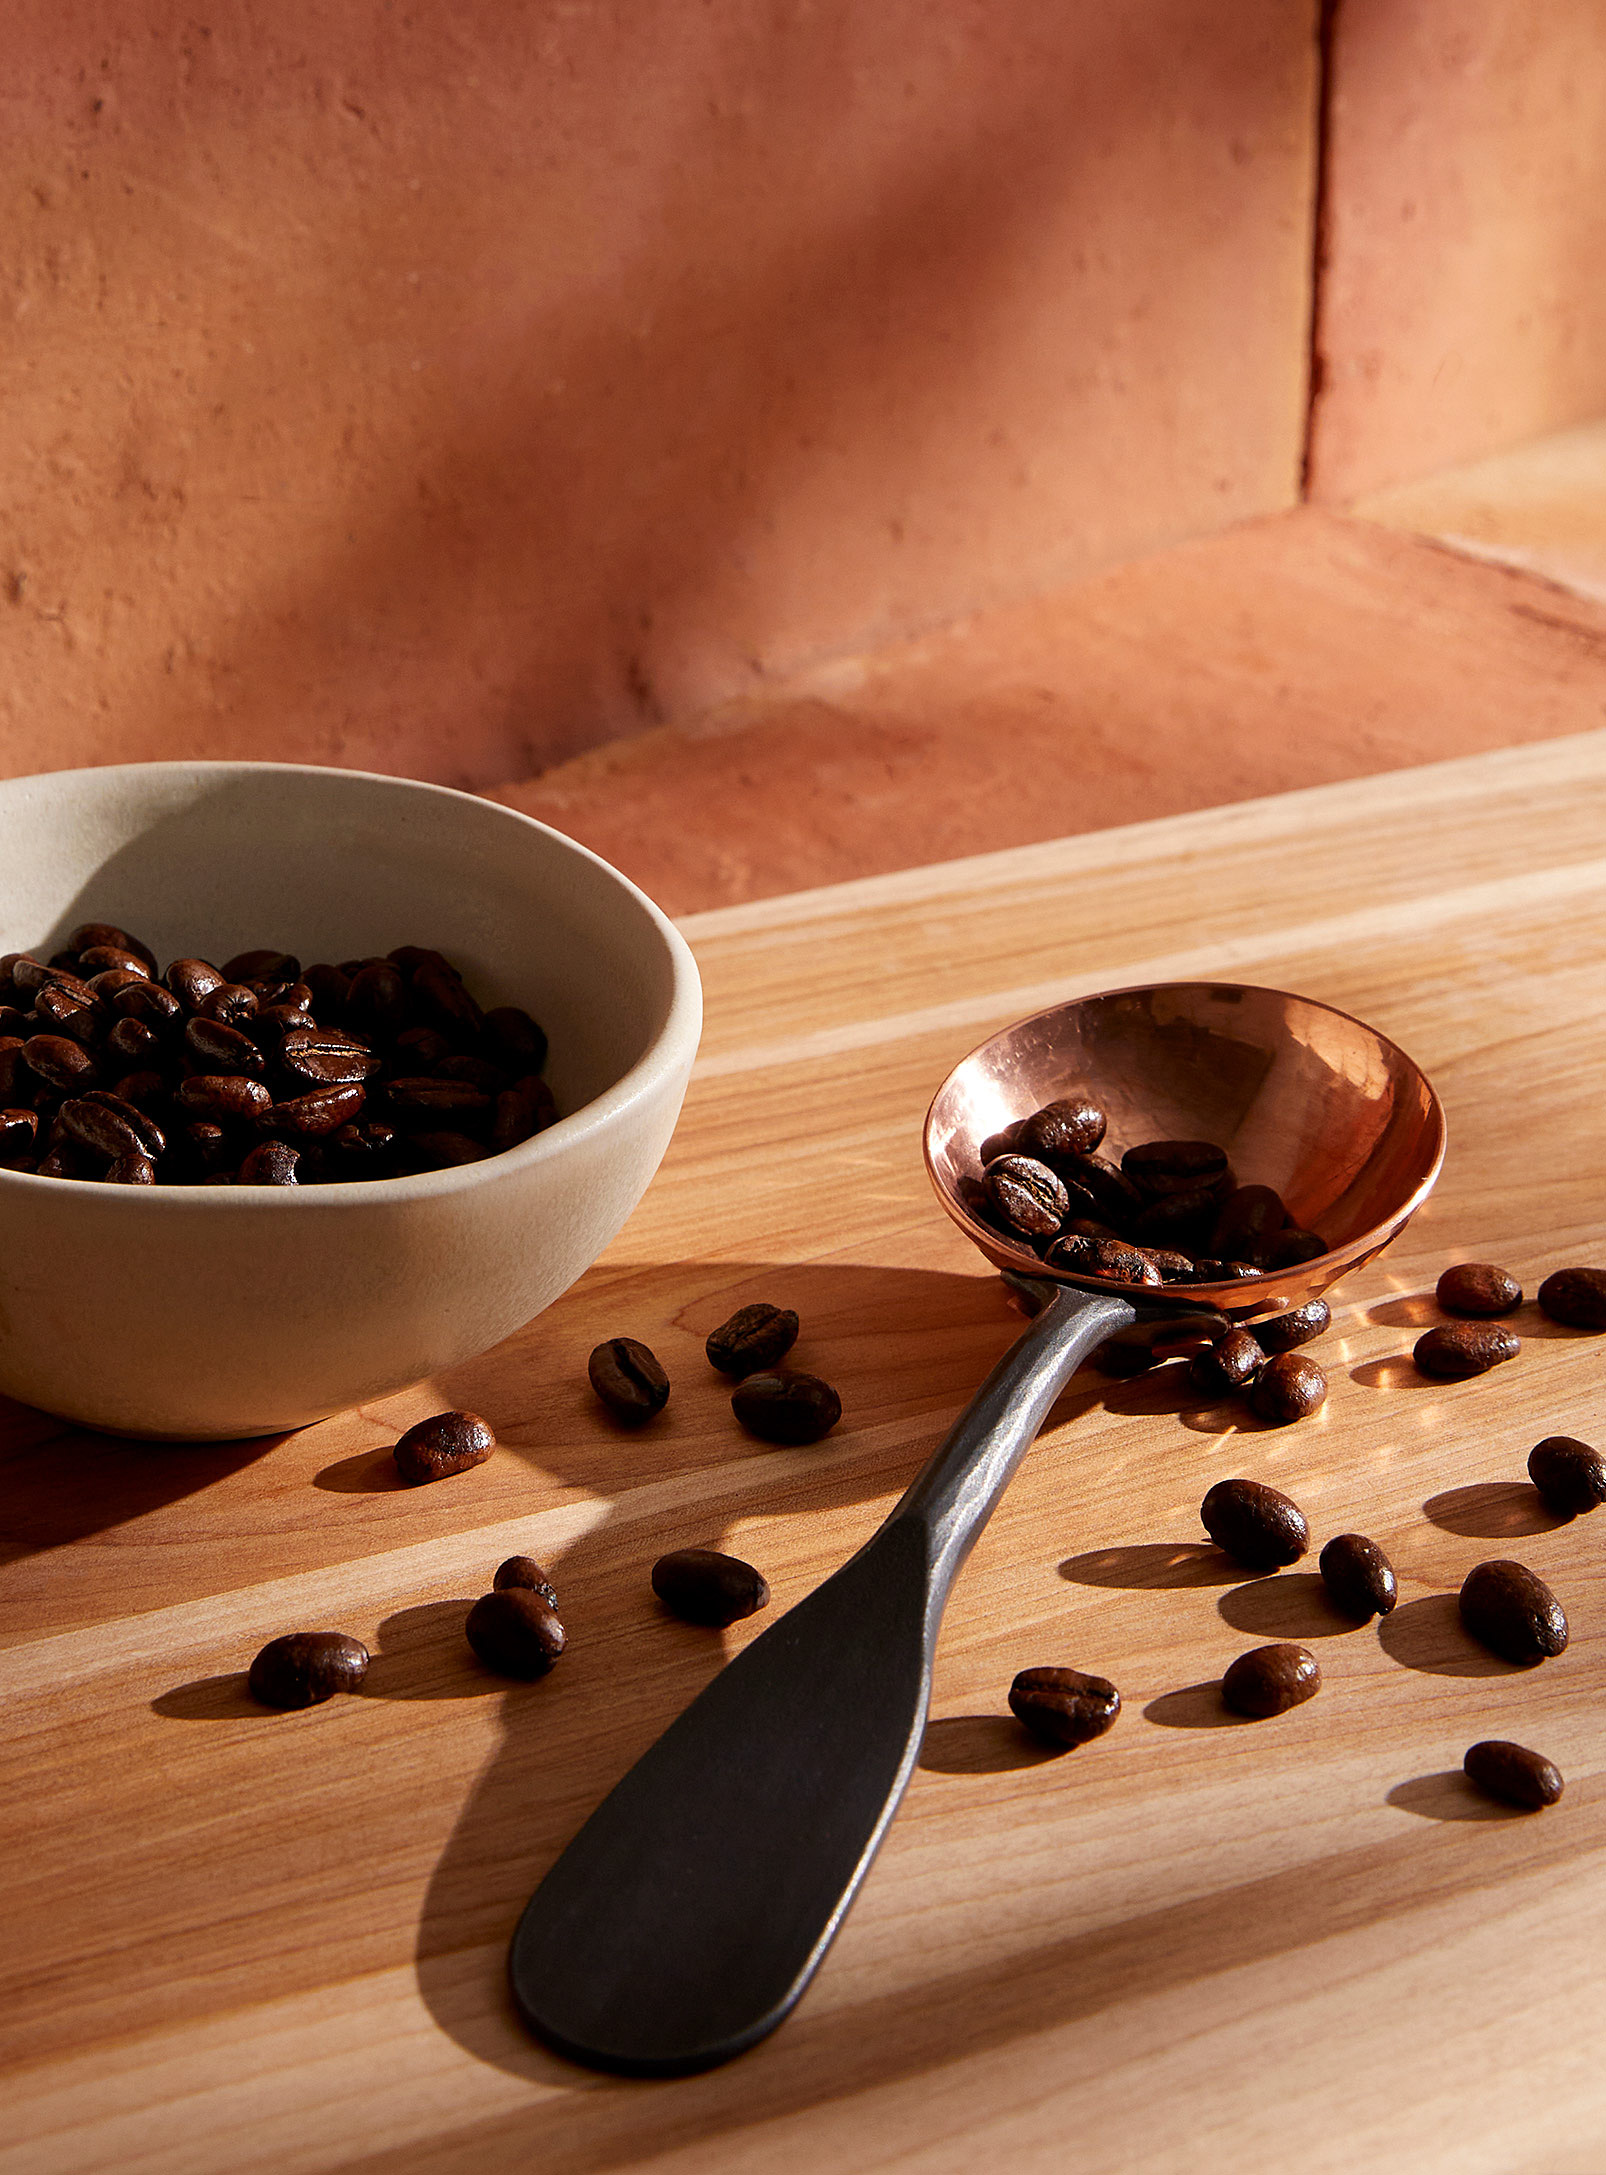 Strobus Forge - ST-Shirtl and copper coffee dosing spoon